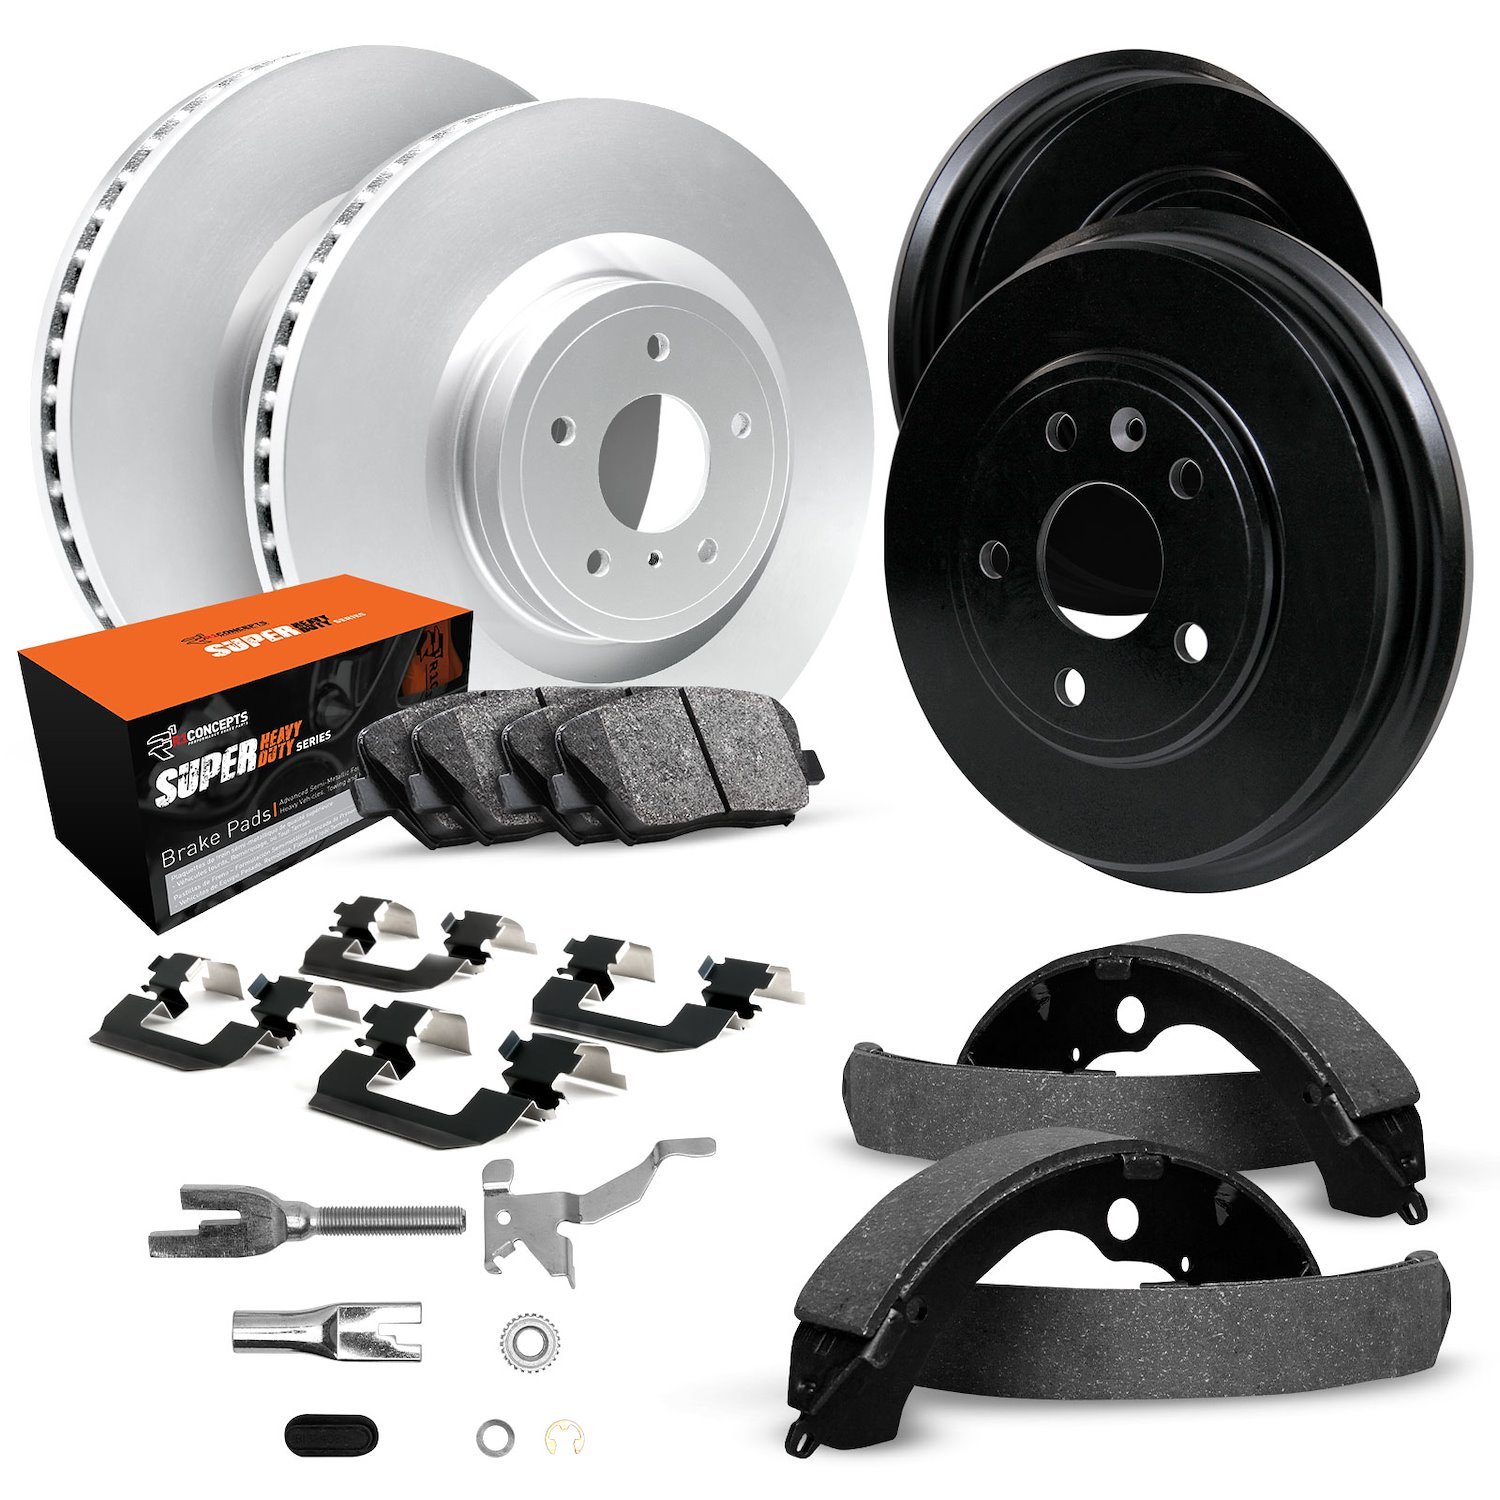 GEO-Carbon Brake Rotor & Drum Set w/Super-Duty Pads, Shoes, Hardware/Adjusters, 1972-1977 GM, Position: Front & Rear